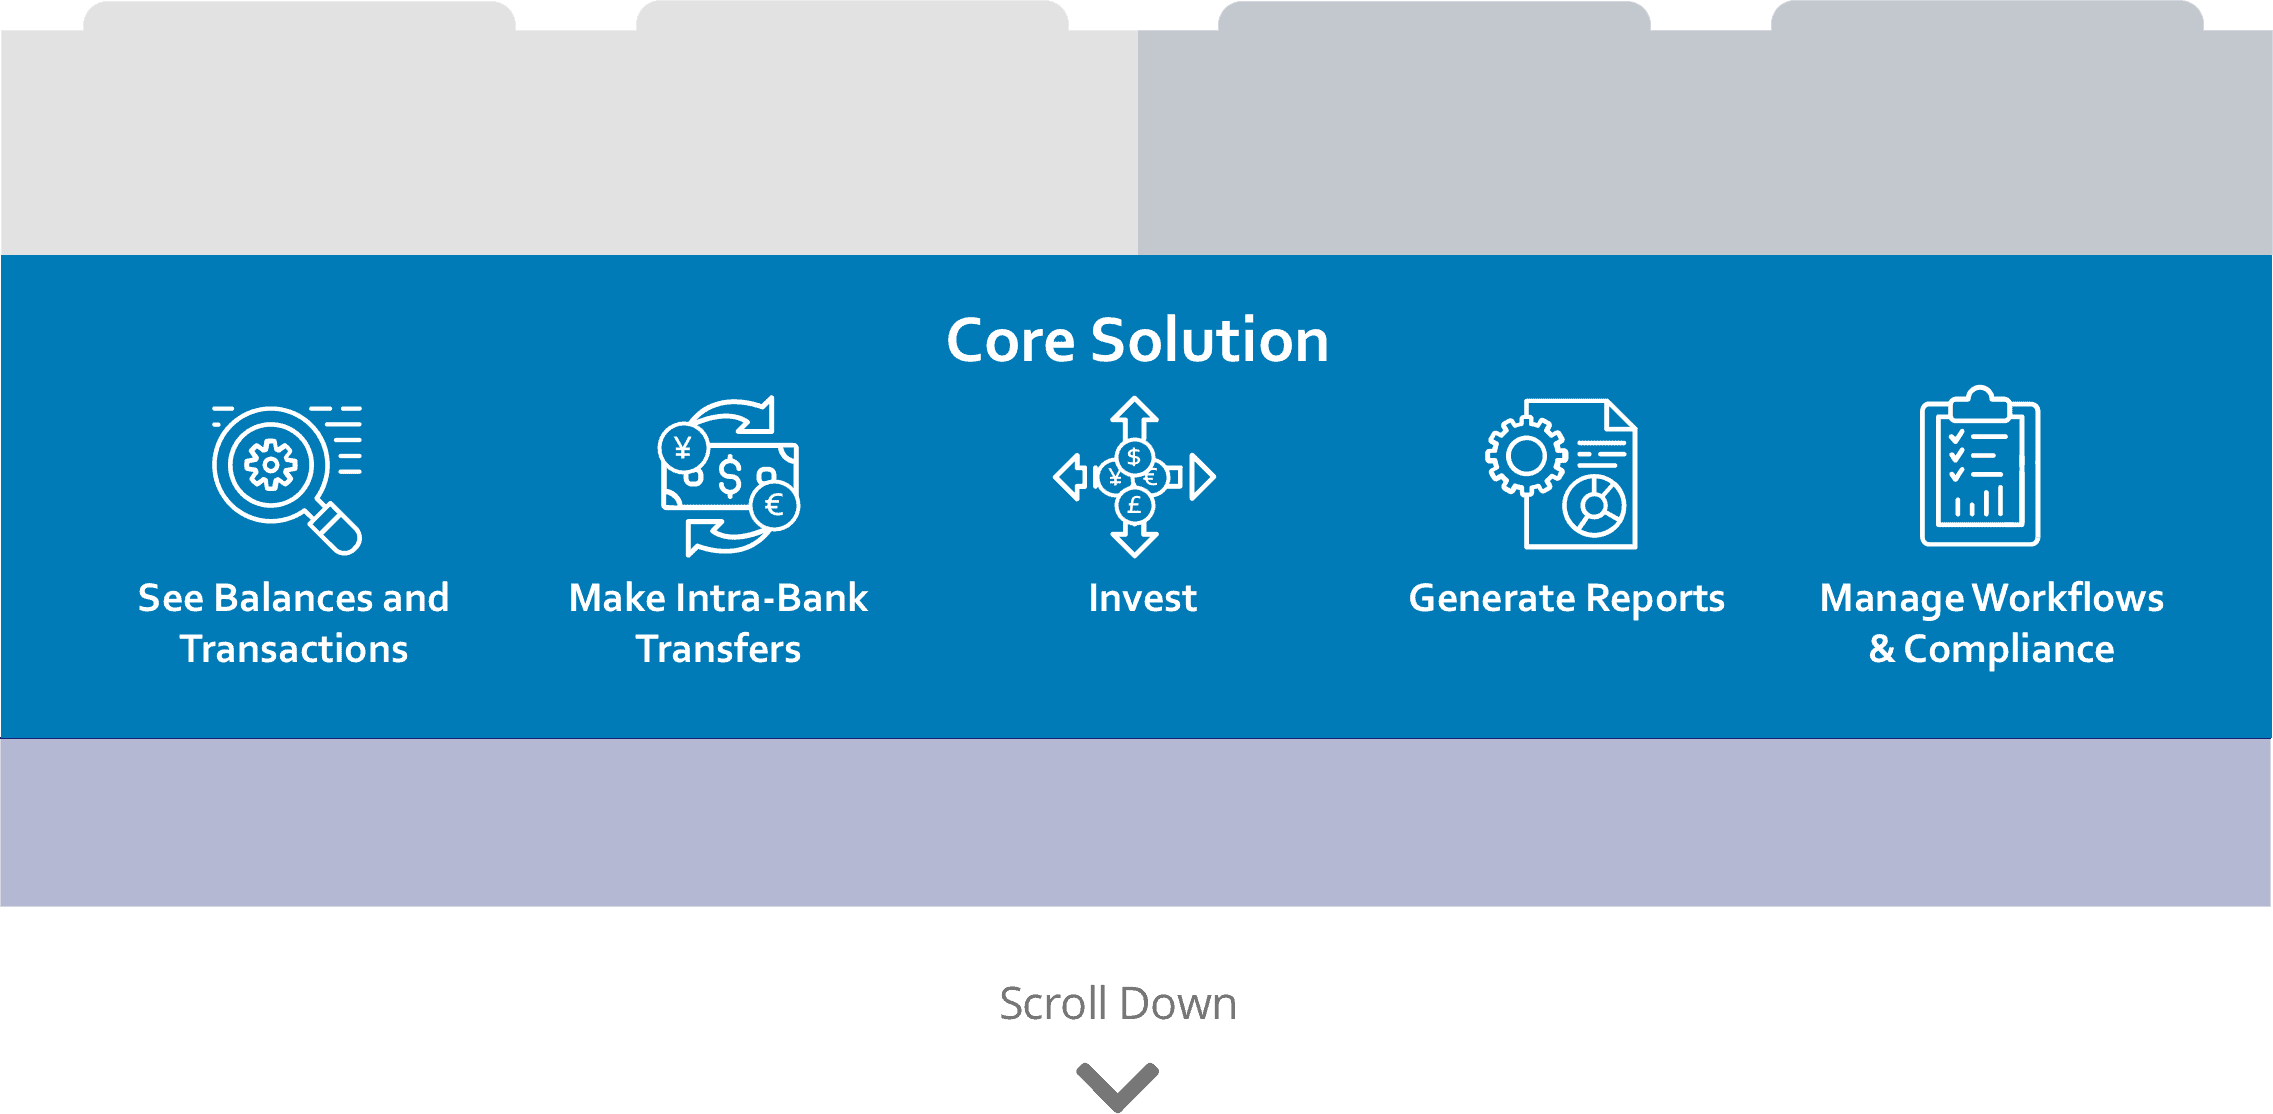 Reads "Core Solution" with 5 icons below: See balances and transaction, make intra-bank transfers, invest, generate reports, manage workflows & compliance